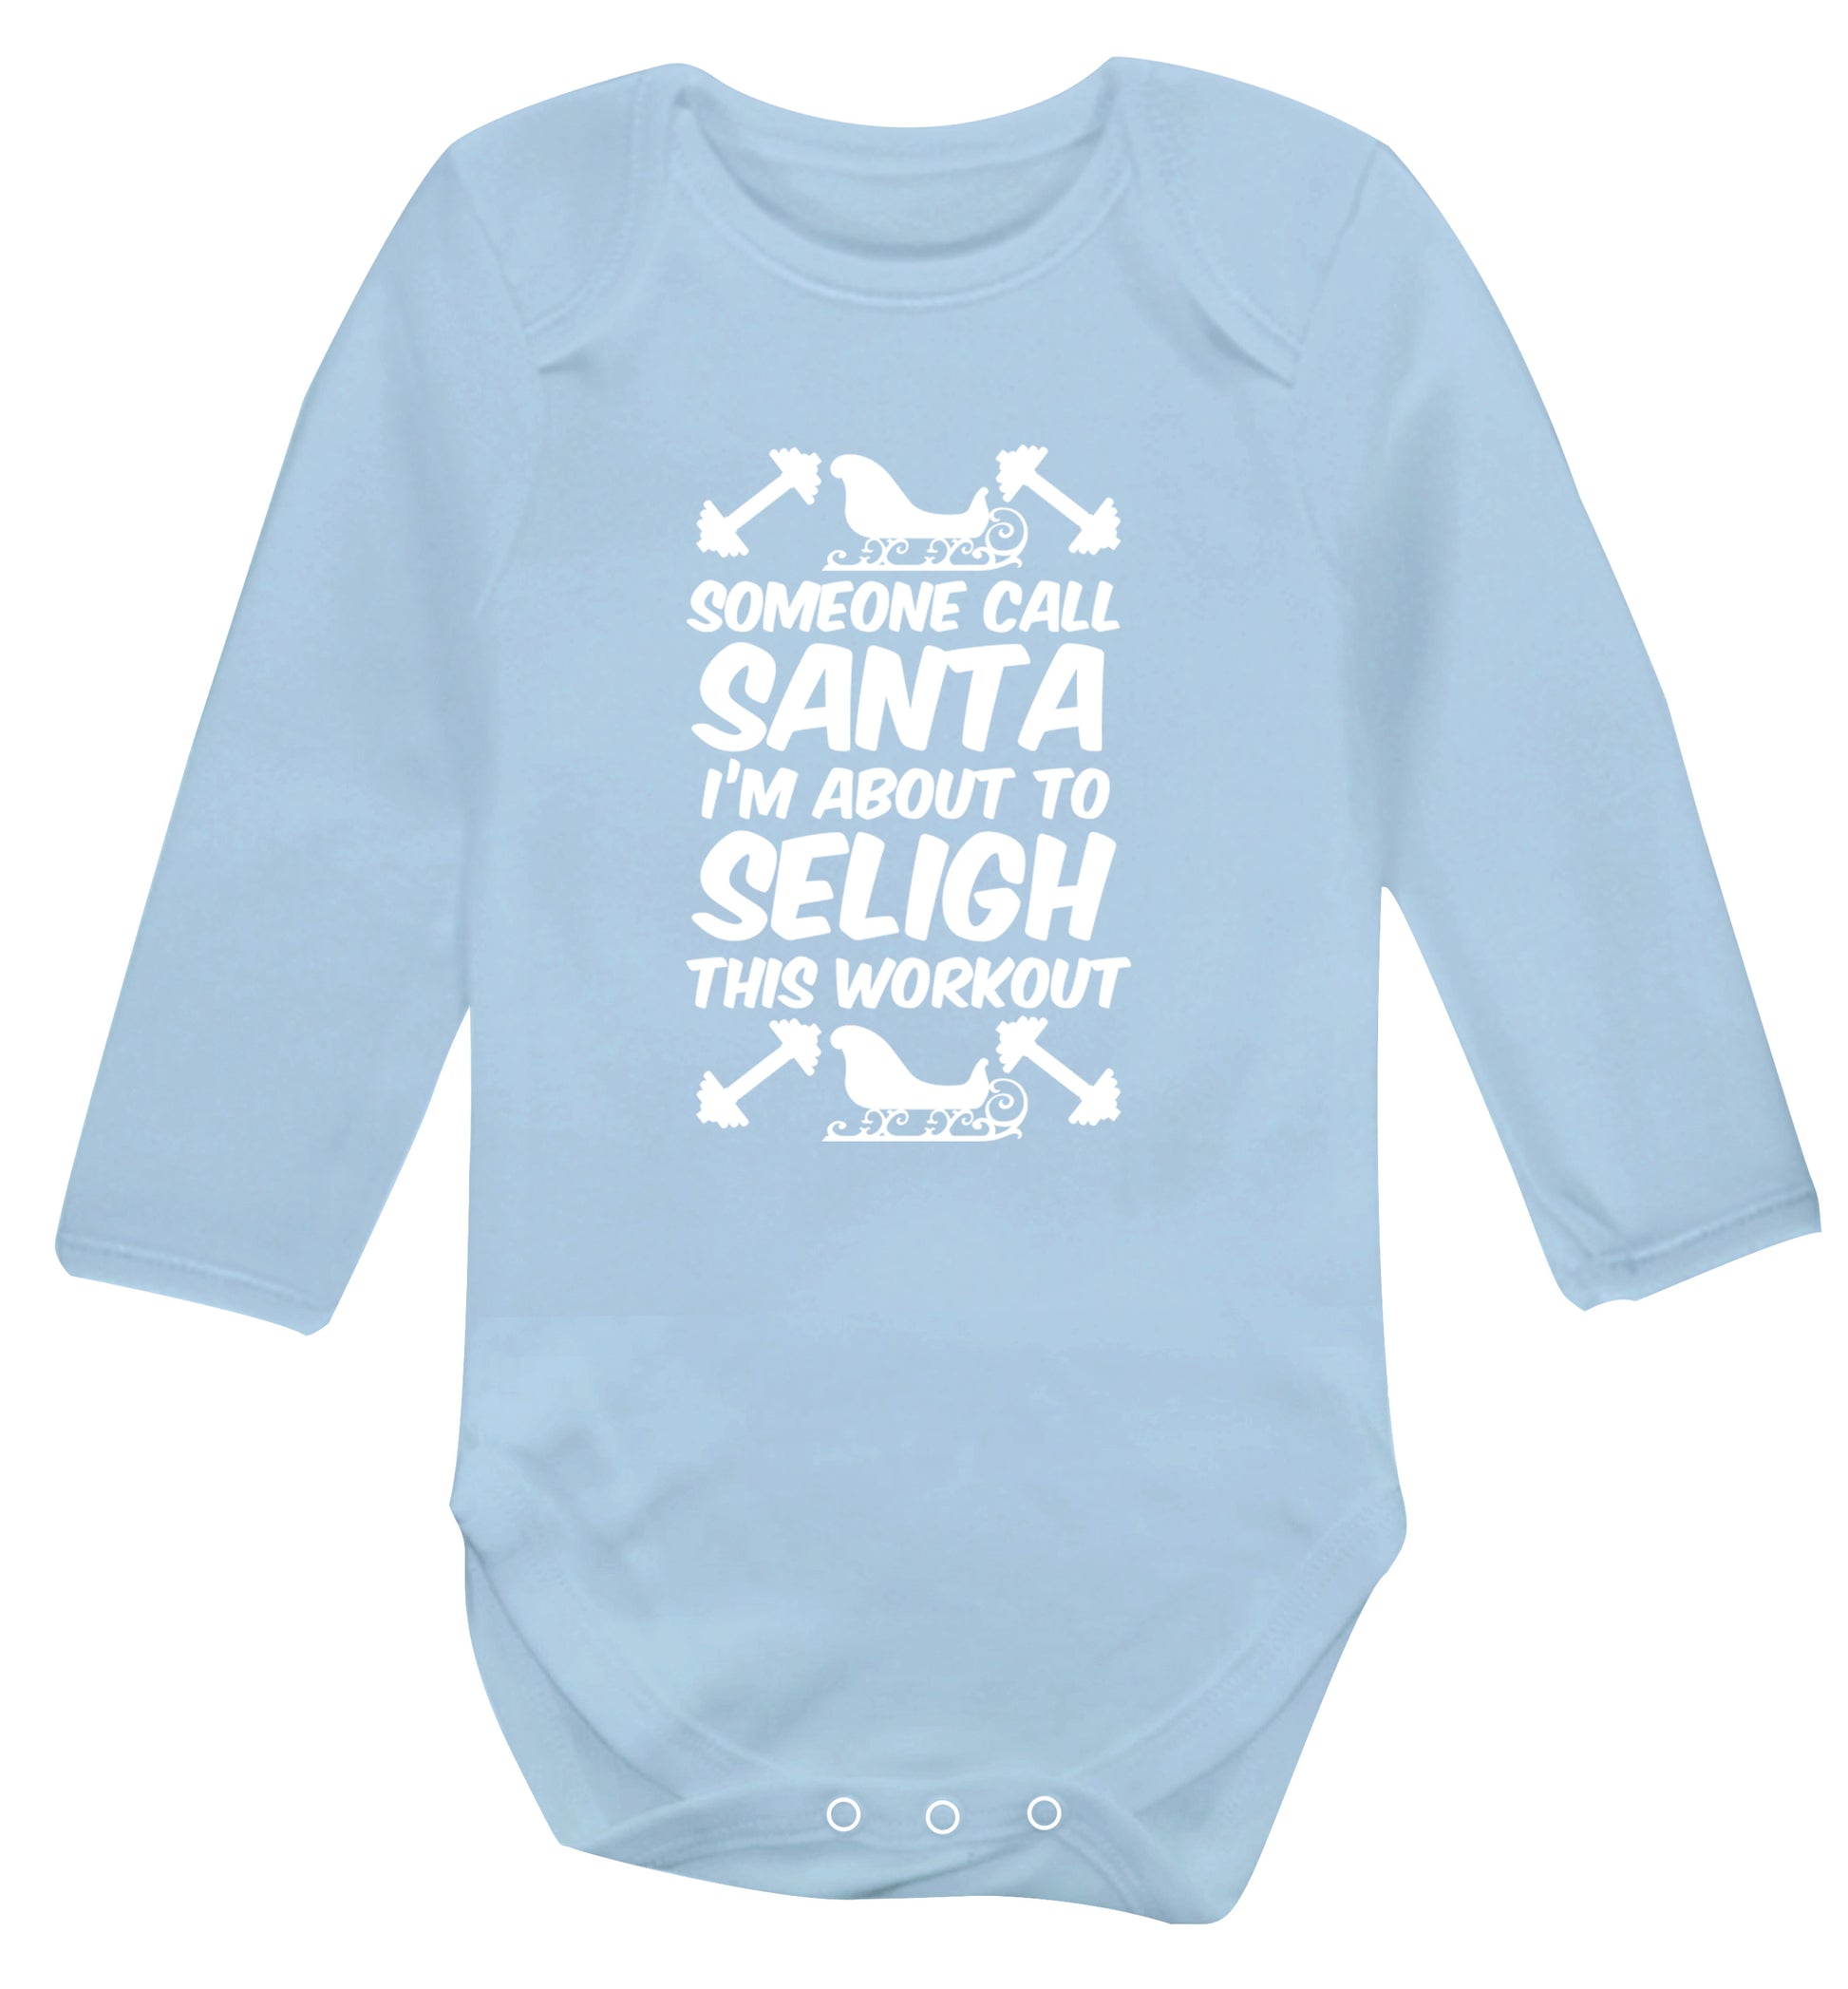 Someone call santa, I'm about to sleigh this workout Baby Vest long sleeved pale blue 6-12 months